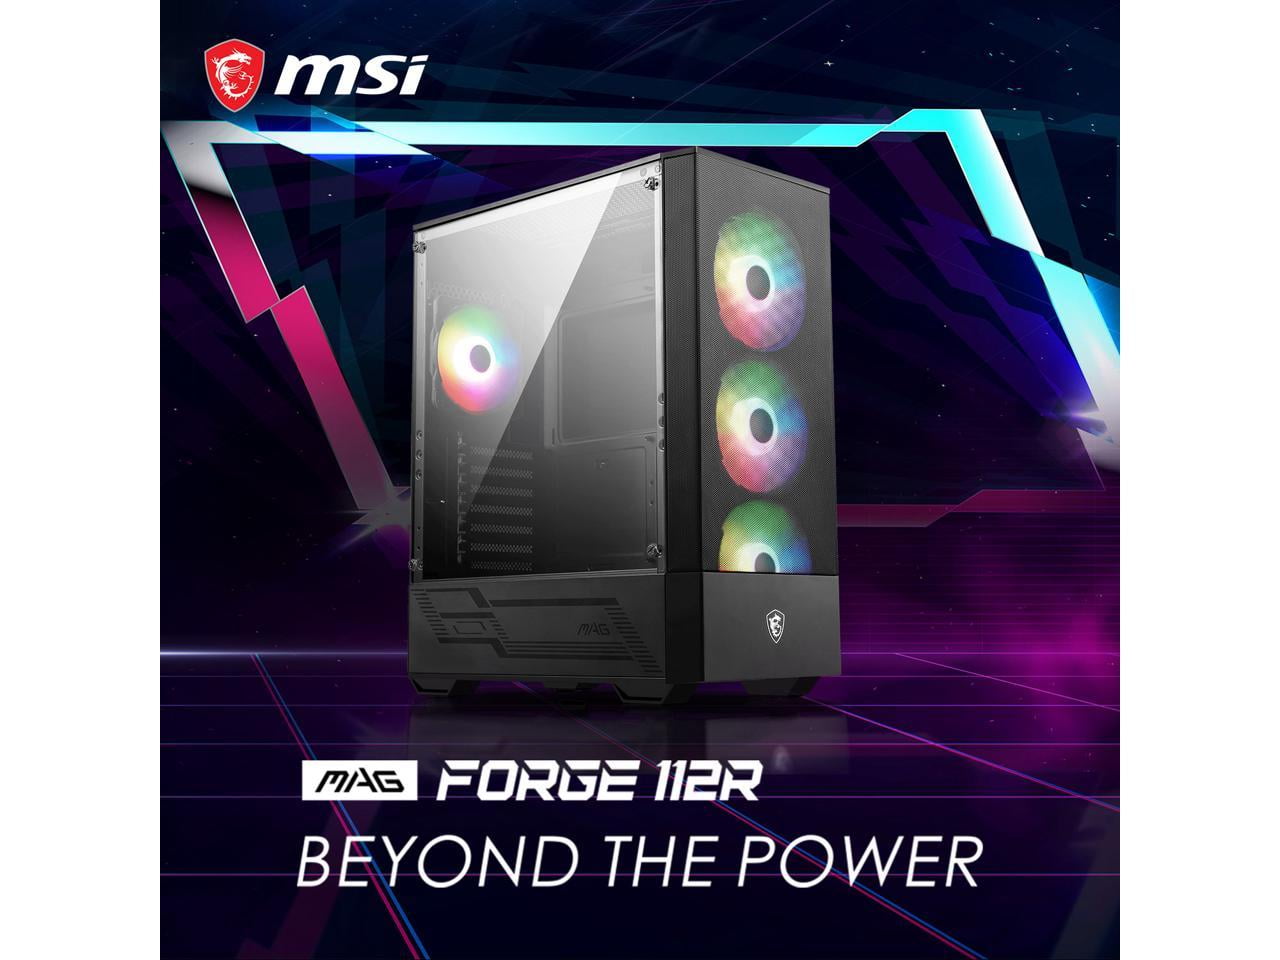 MSI GAMING CABINET MAG FORGE 112R ATX